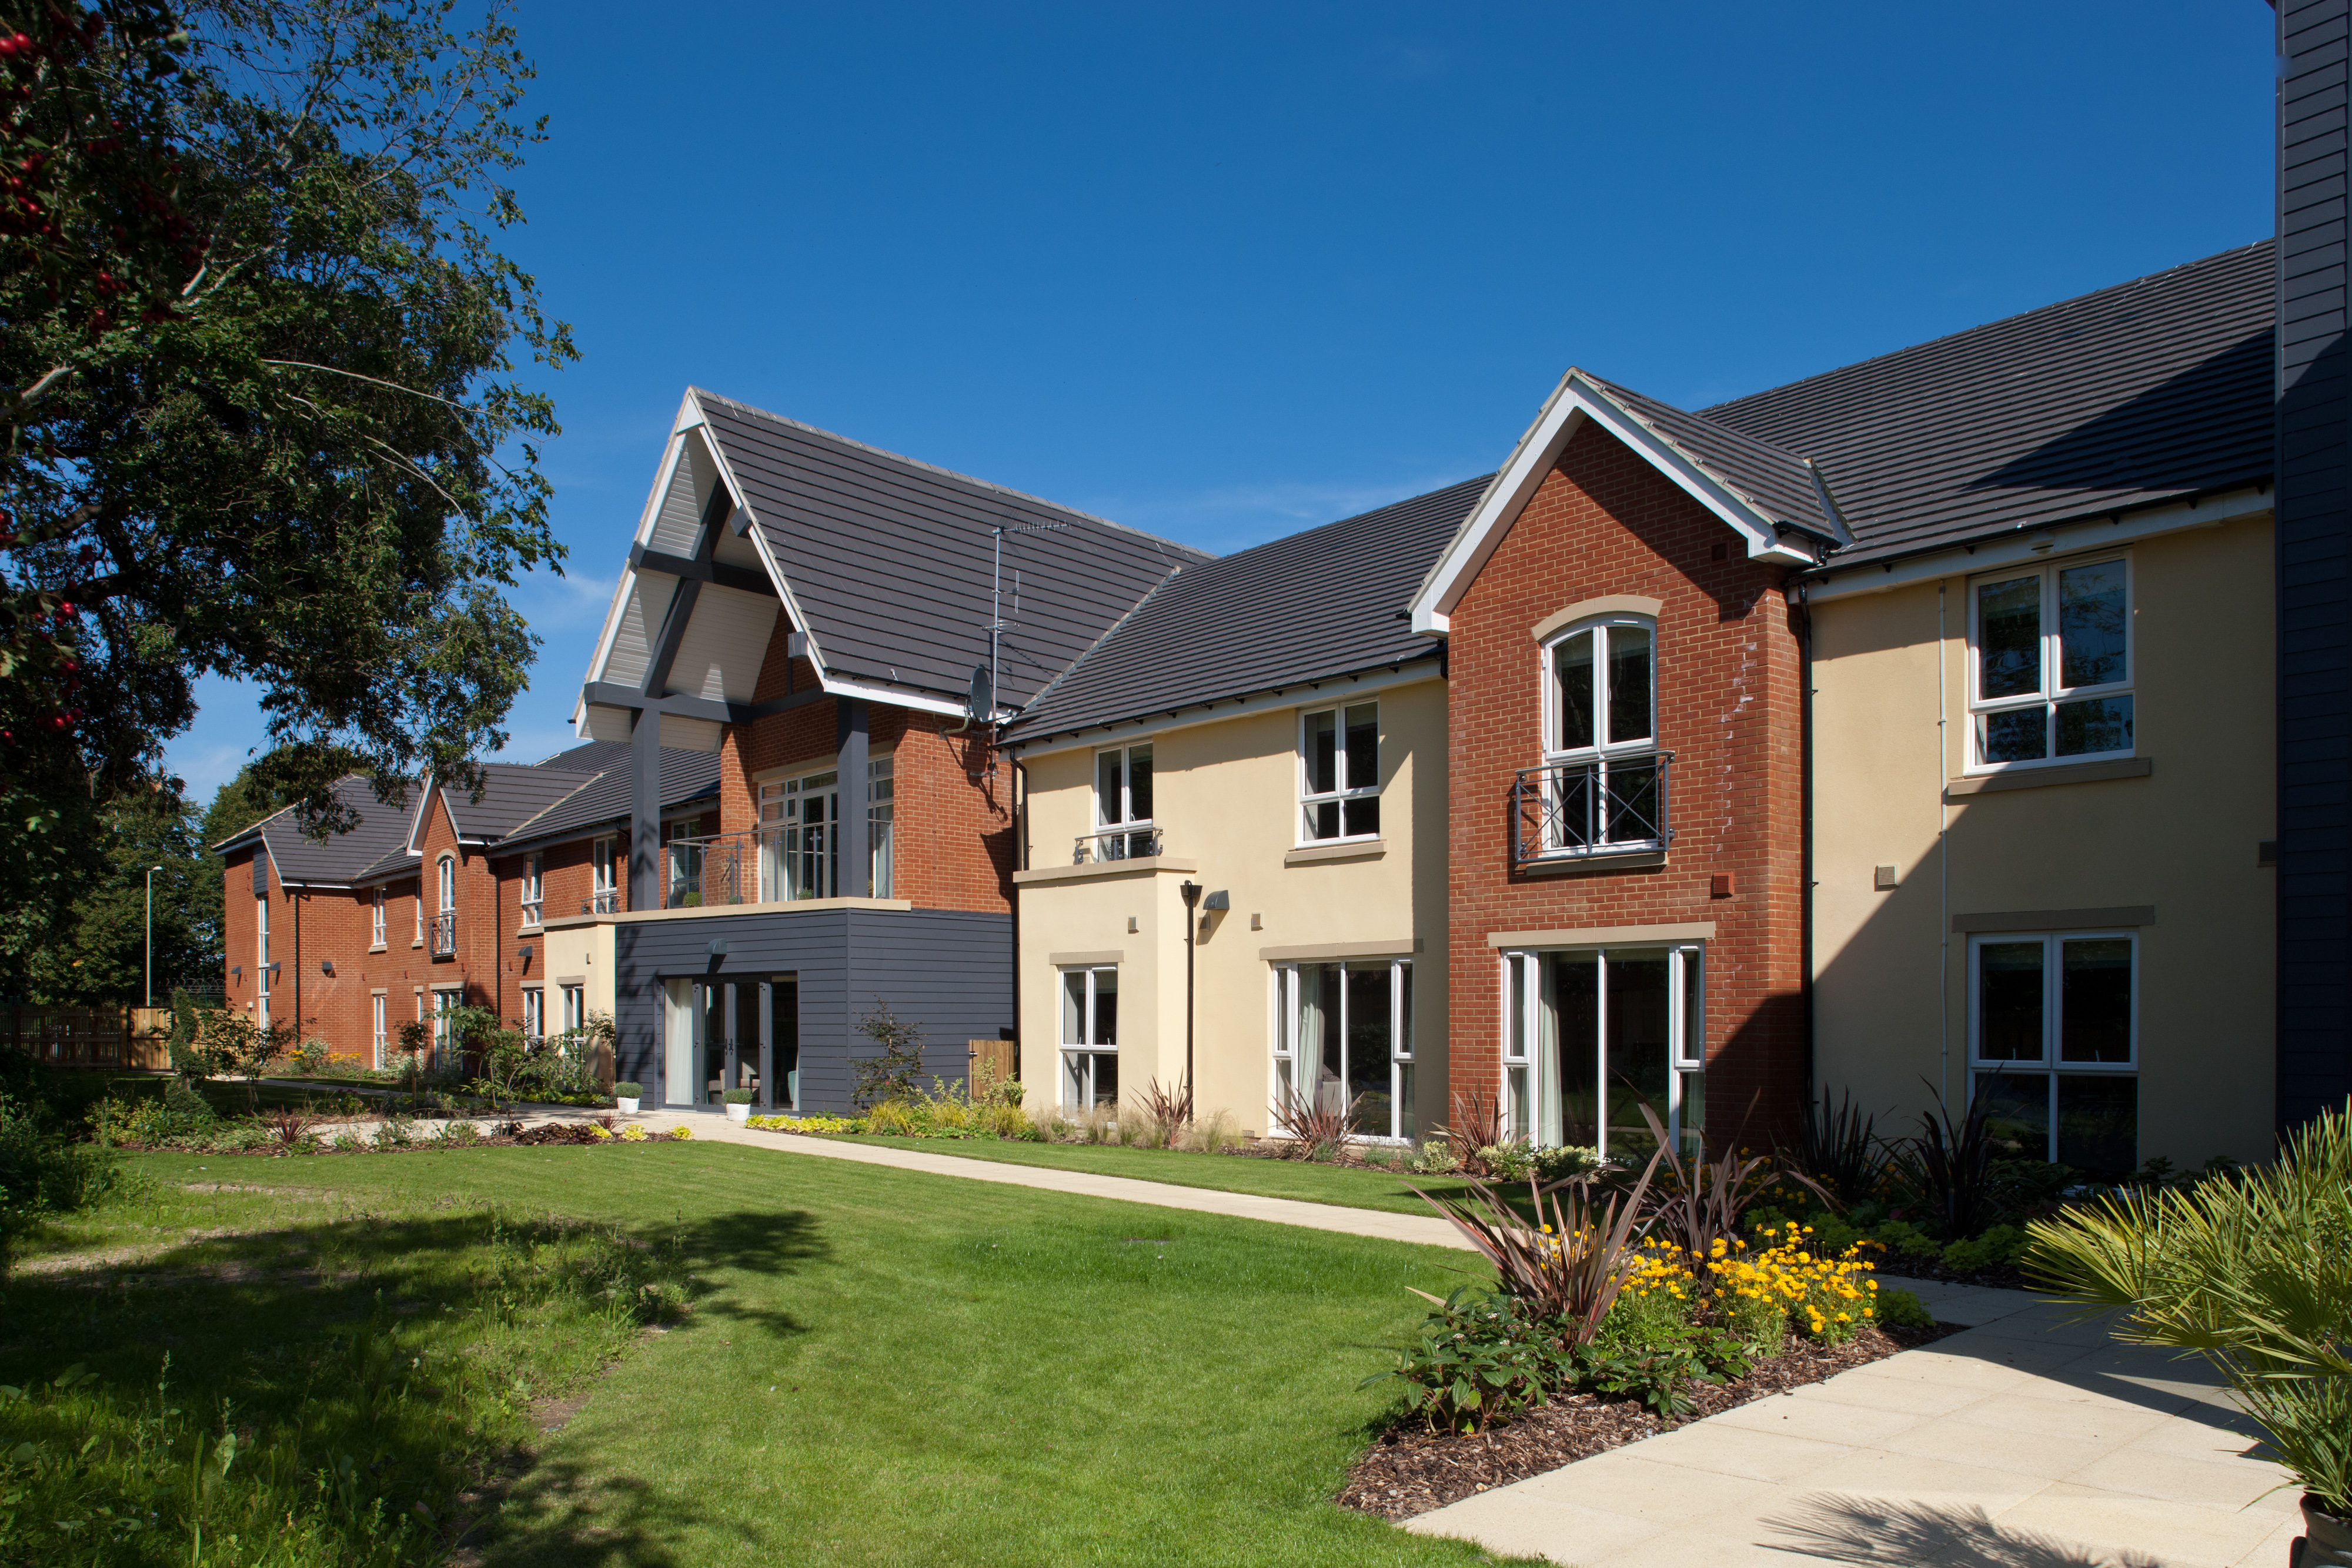 Care home exterior front